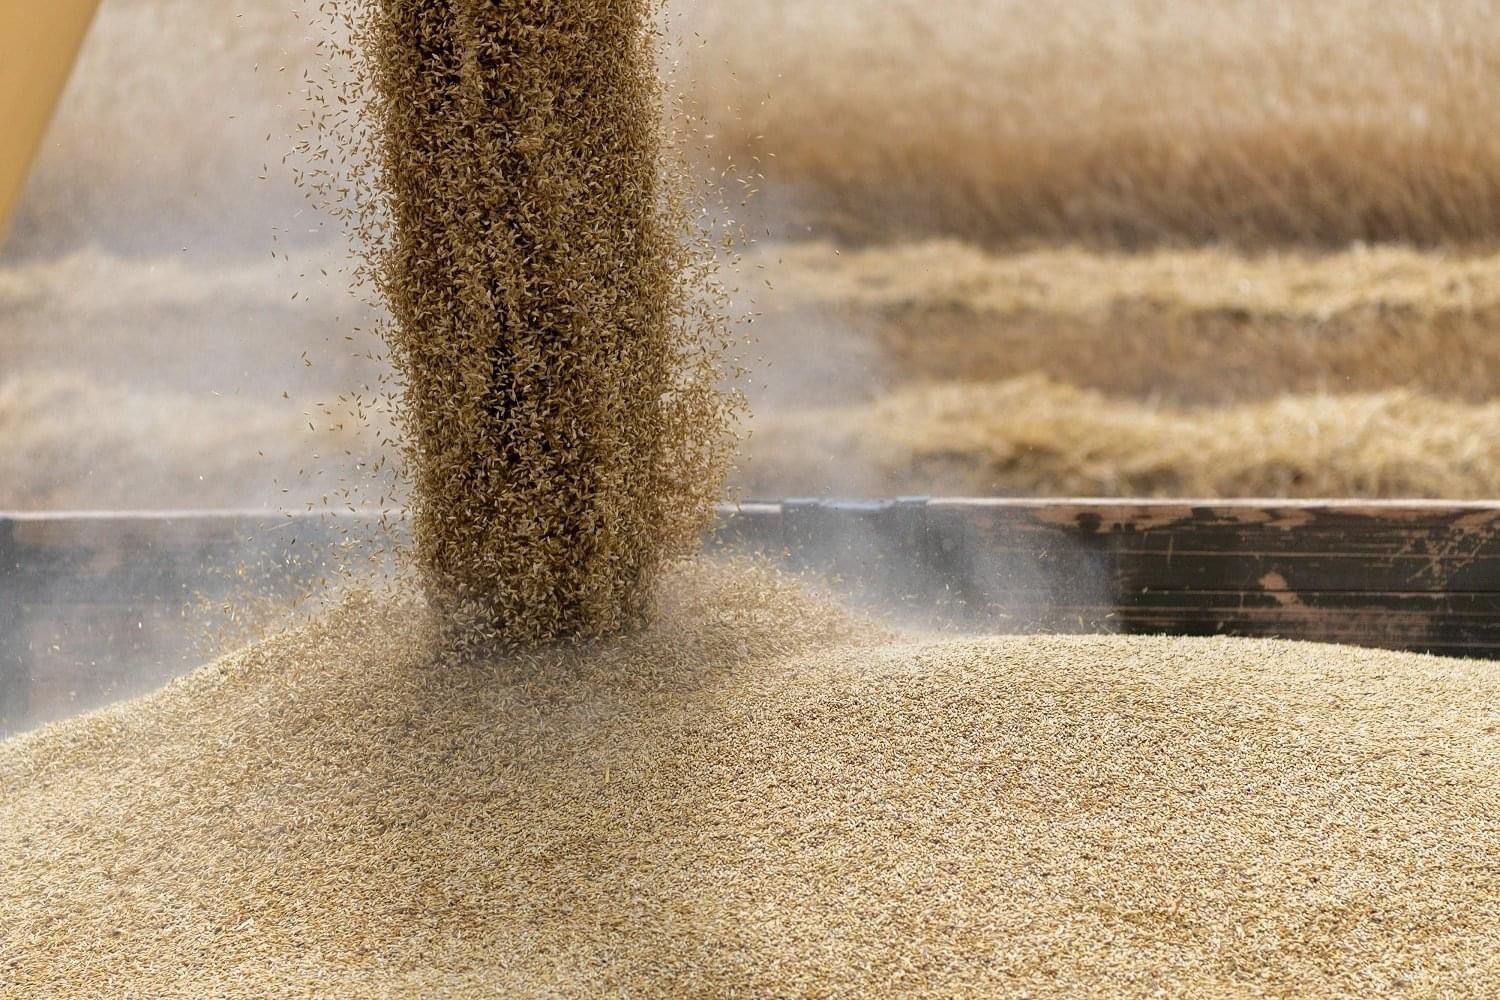 Azerbaijan to succeed in meeting majority of local demand for wheat